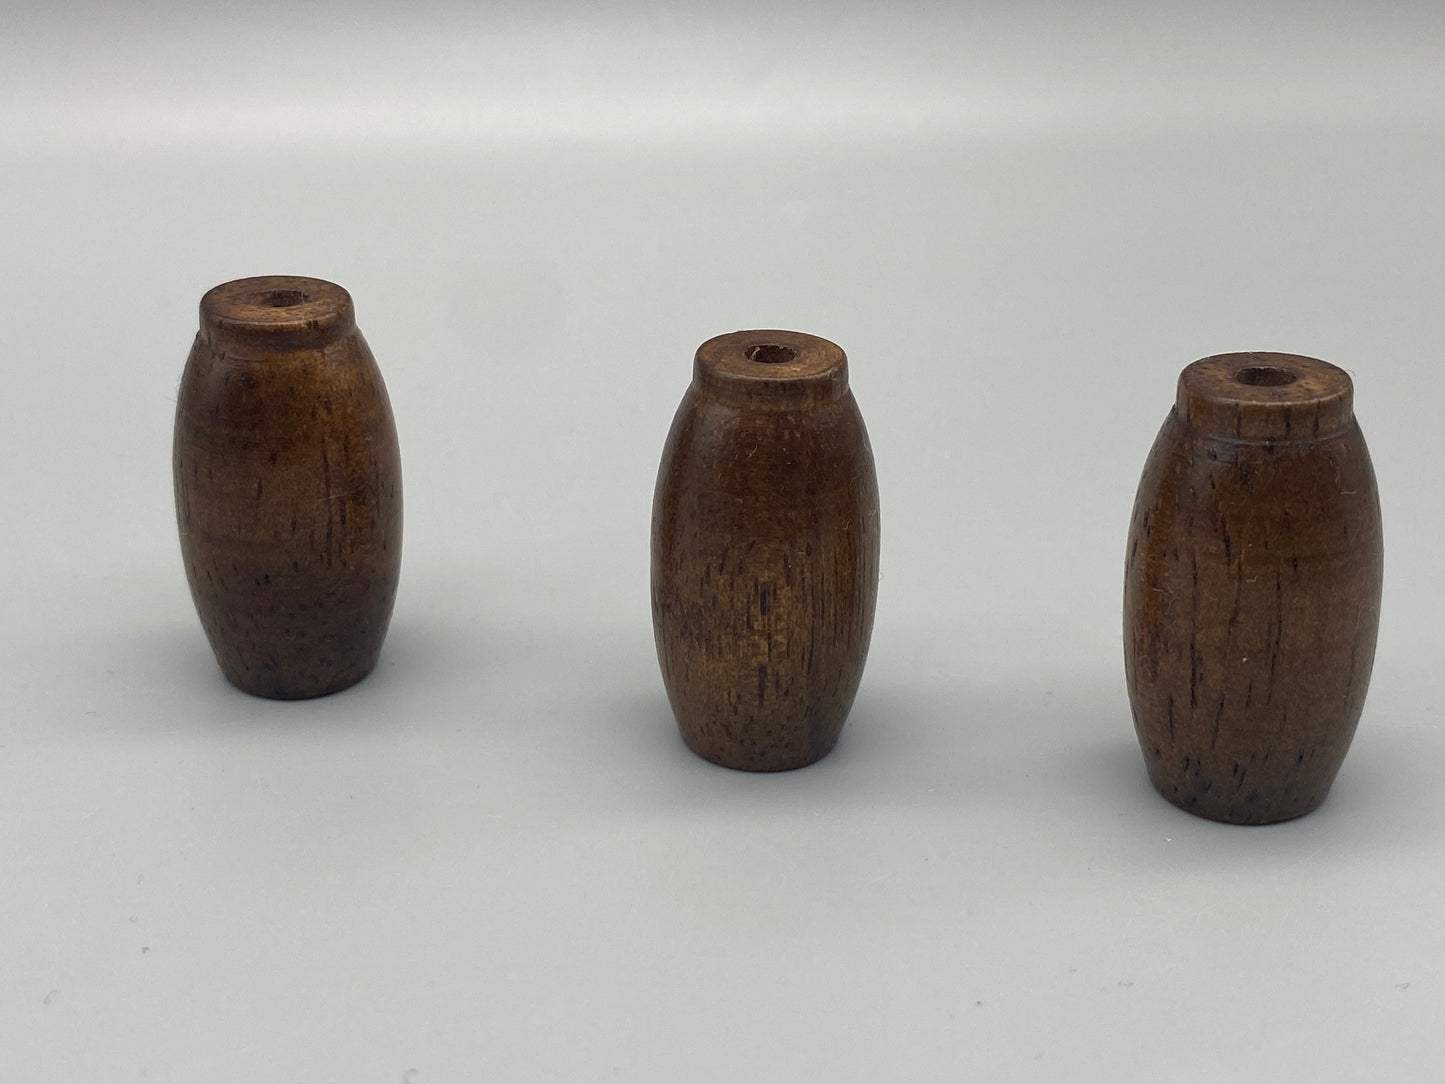 Wooden Blinds Acorns - Cord Pull / Light Cord Pull  - Walnut - Pack of 3